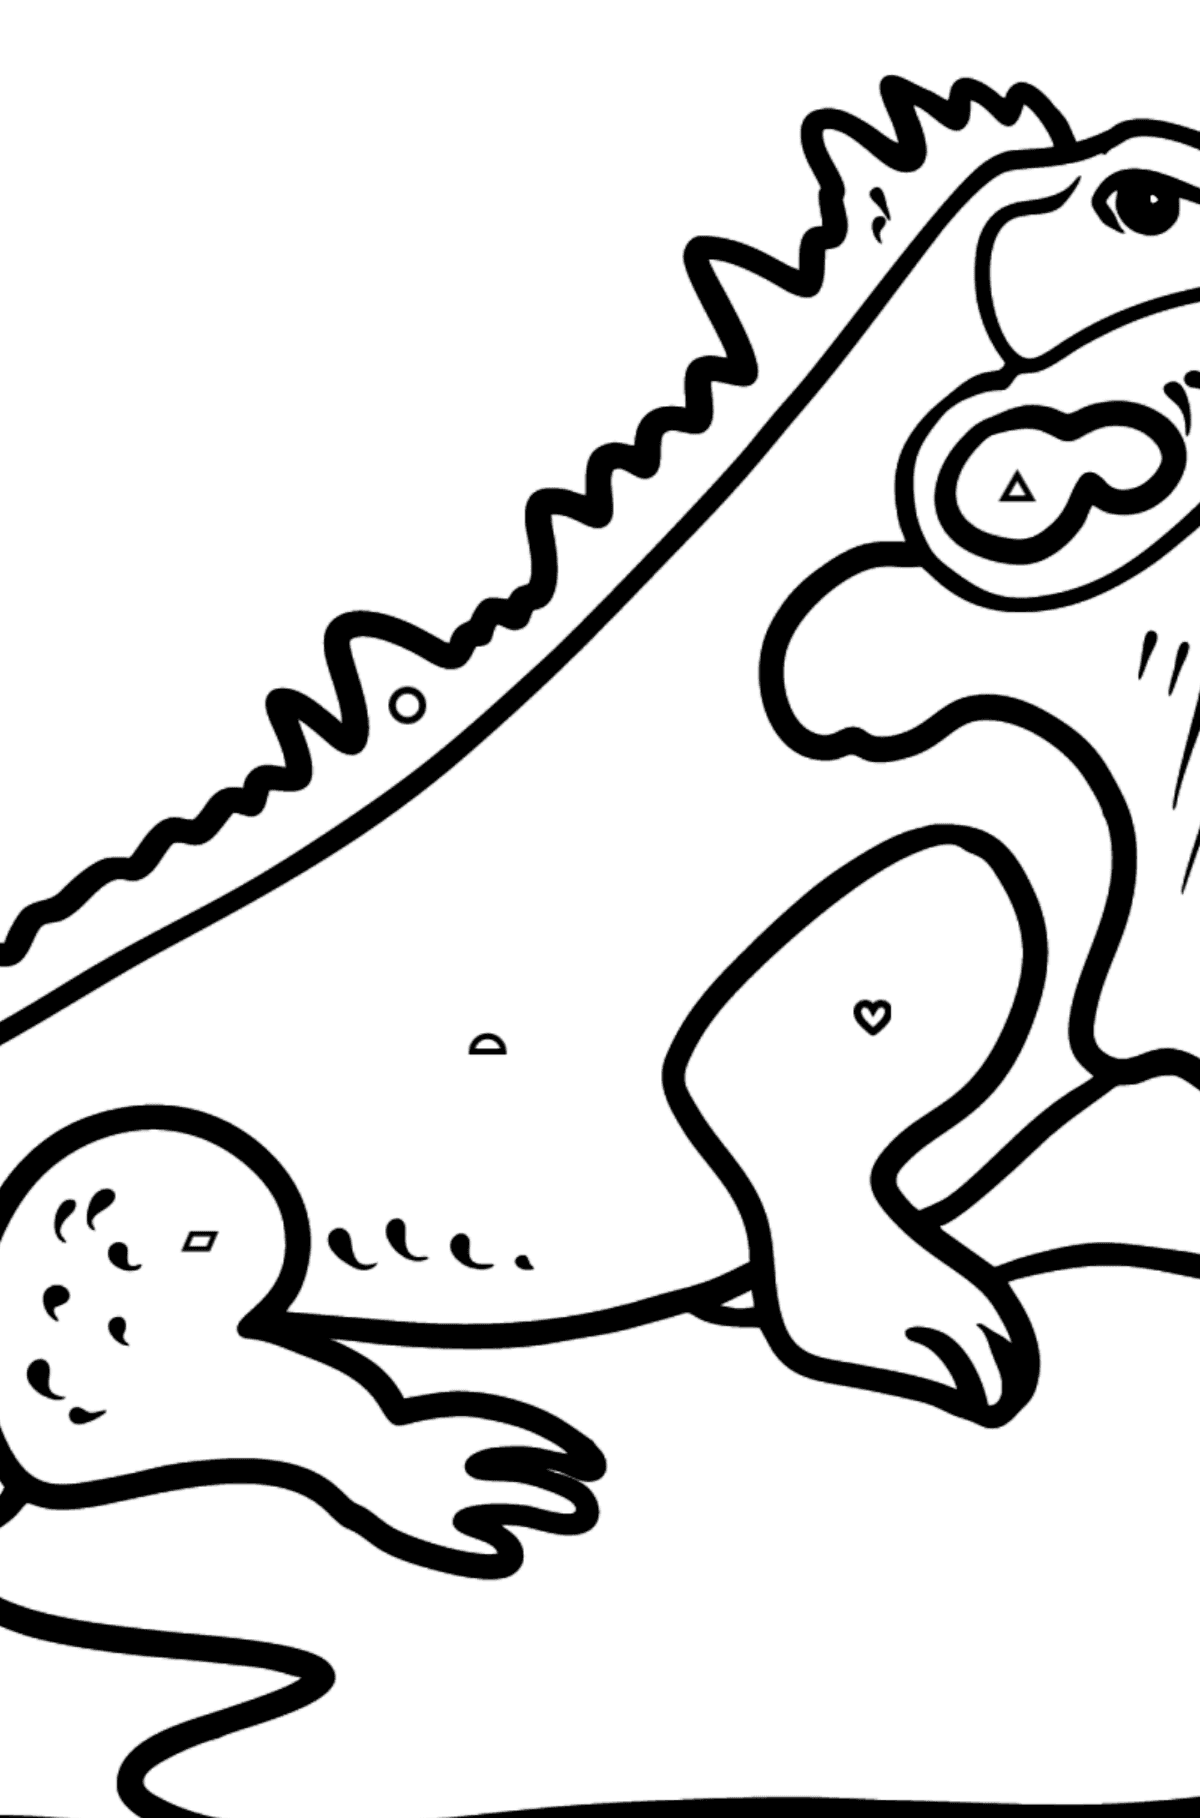 Portuguese Letter I coloring pages - IGUANA - Coloring by Geometric Shapes for Kids